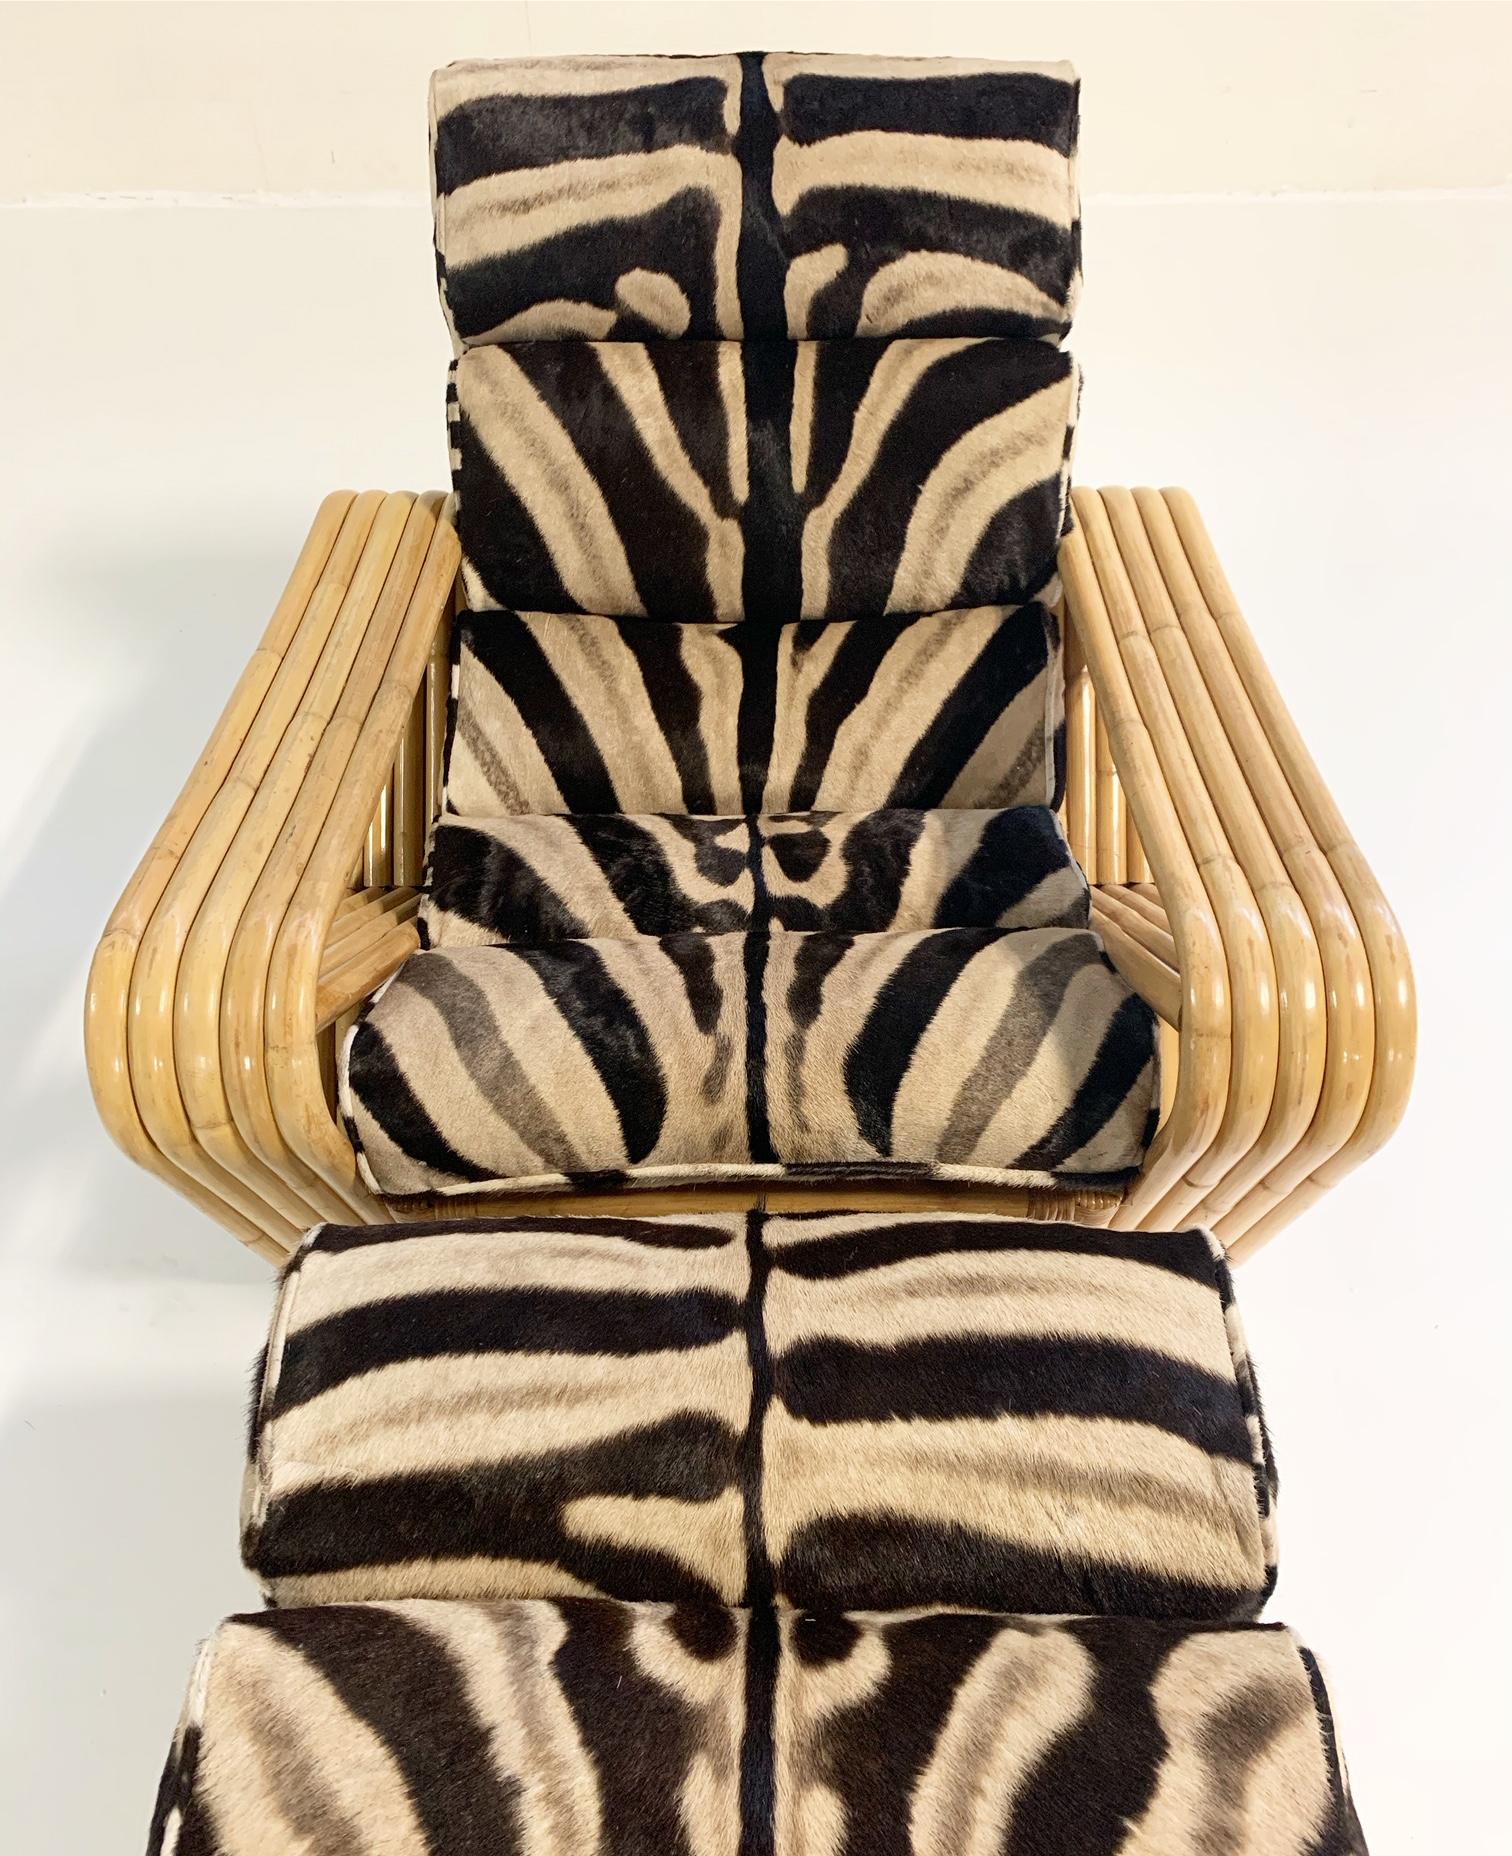 Whoa. This Paul Frankl style lounge chair and ottoman have magnetism. The sloping, rolling, luxurious zebra hide cushions generously stuffed with feathers. The curves and bends of the gorgeous rattan. Zebra hide and rattan are a match made in design